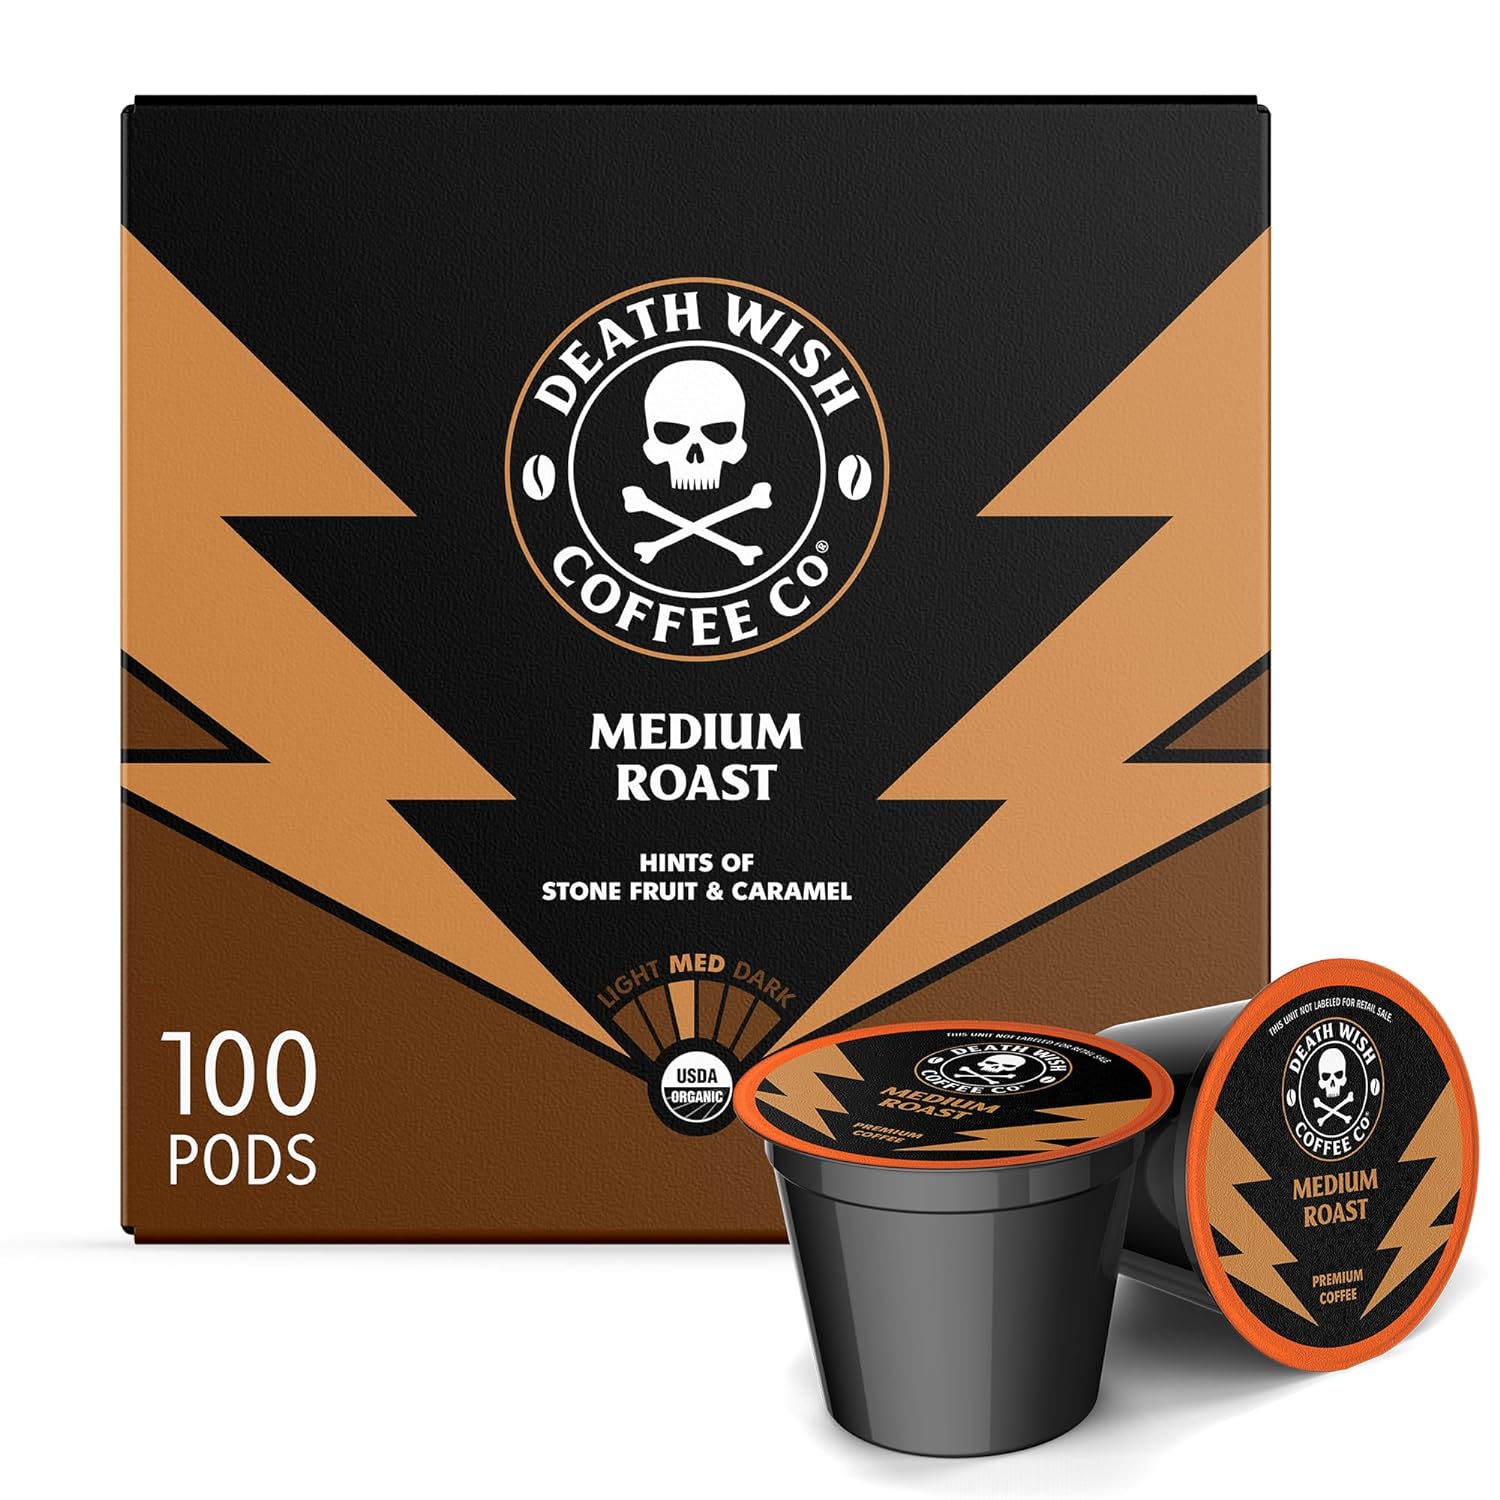 Death Wish Coffee - Single Serve Pods - Medium Roast Coffee Pods - Made with USDA Certified Organic - Extra Kick of Caffeine - 100 Count (Pack of 1)